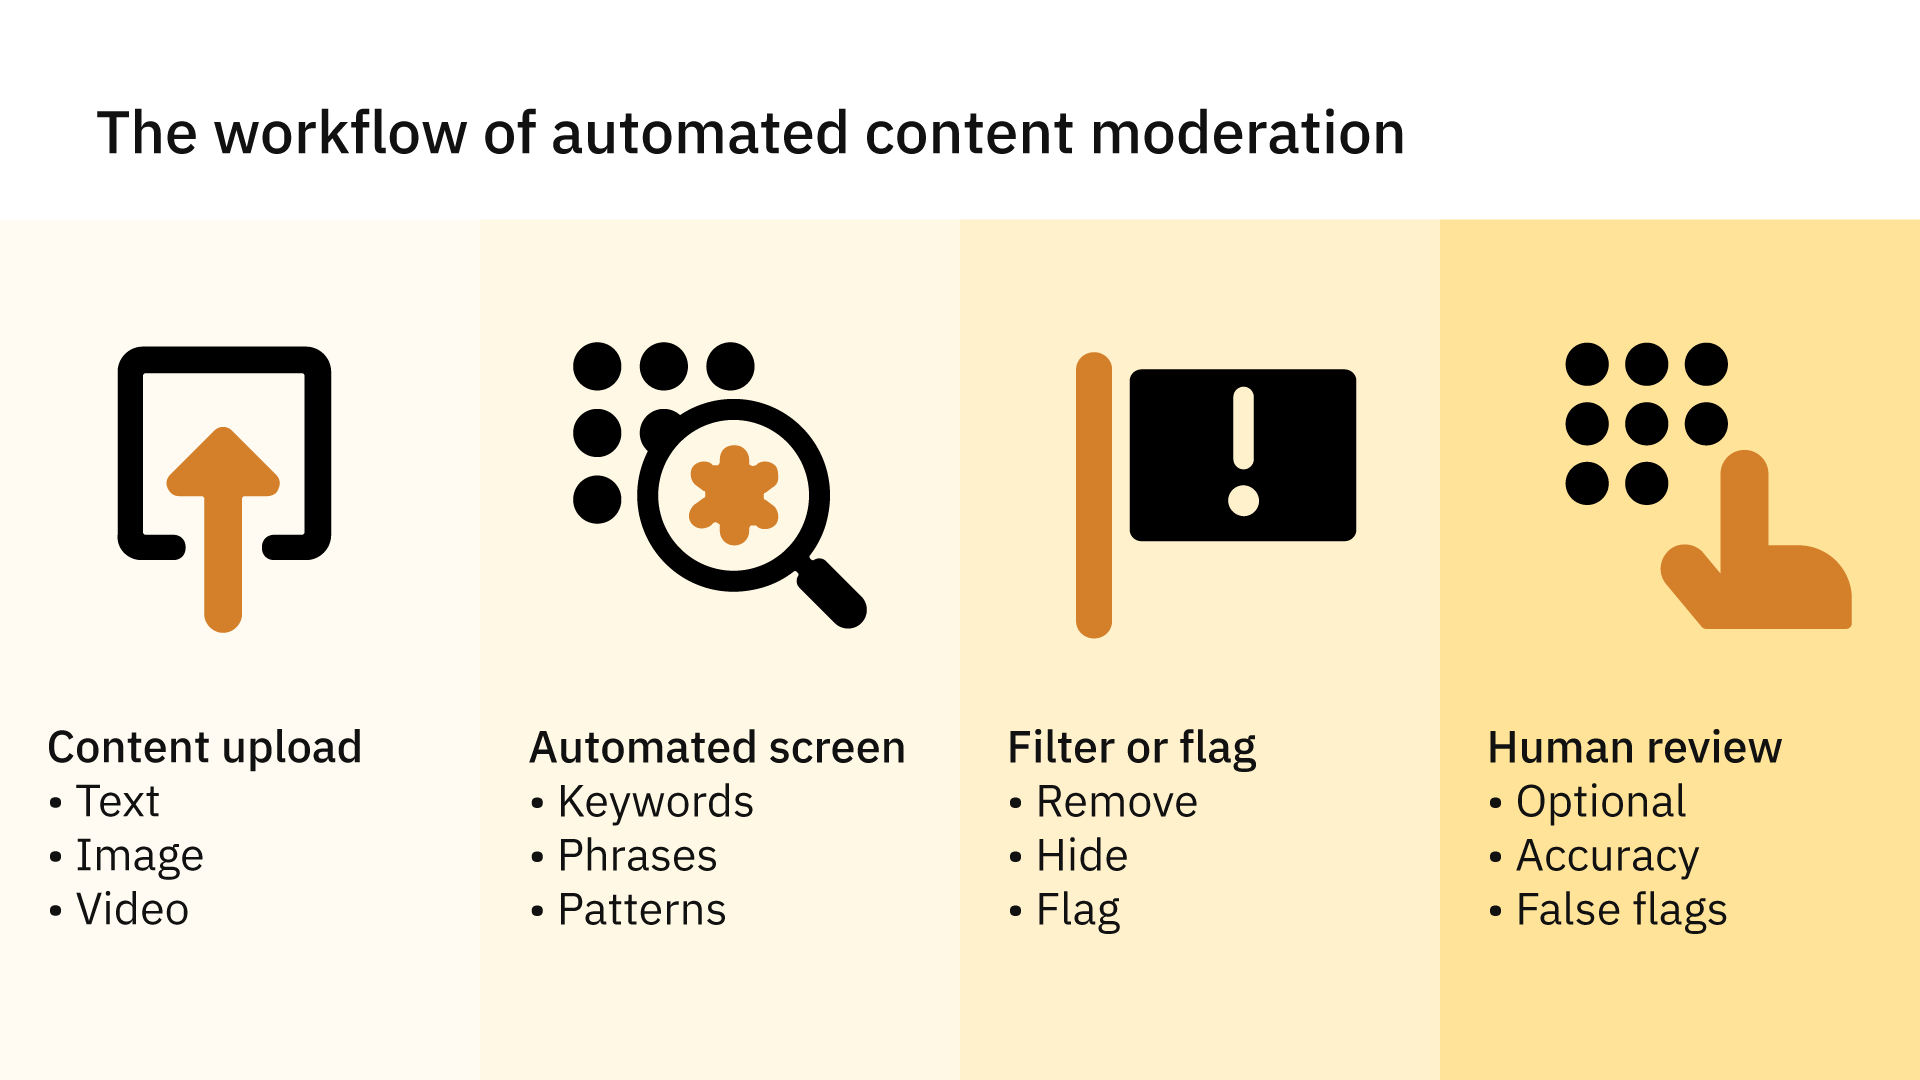 Automated content moderation workflow